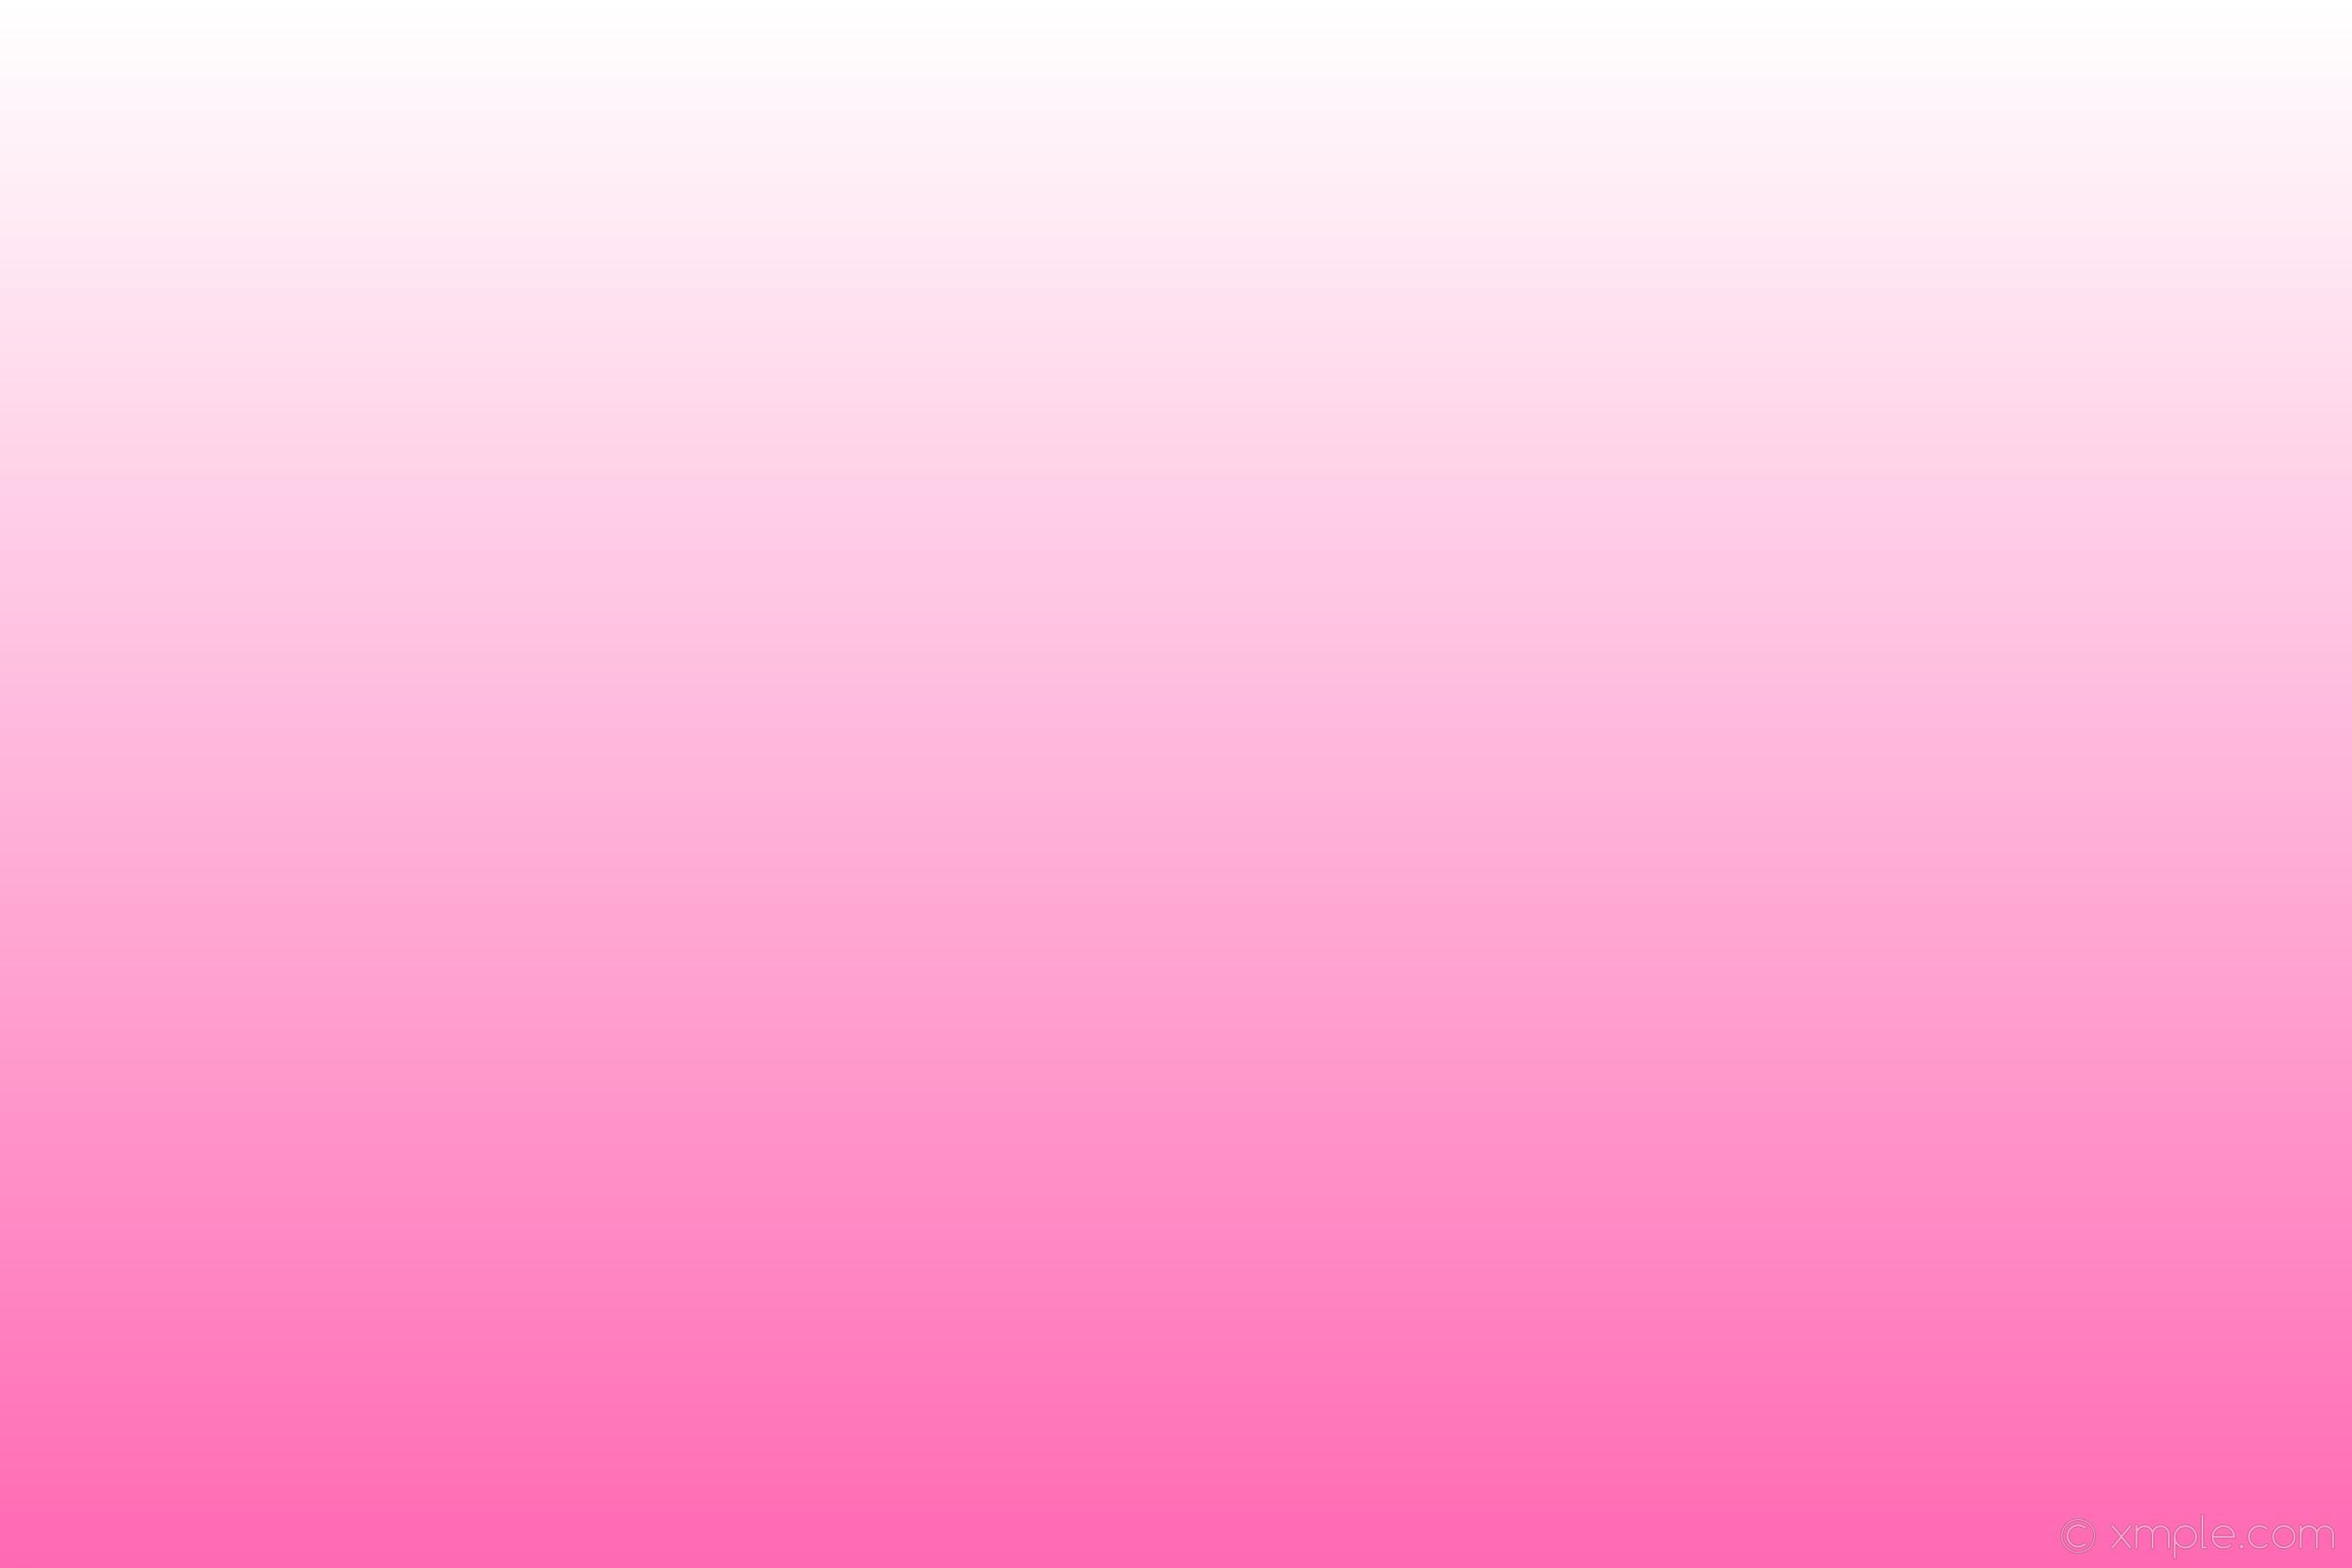 2736 x 1824 · jpeg - Pink Ombre Wallpaper (60+ images)